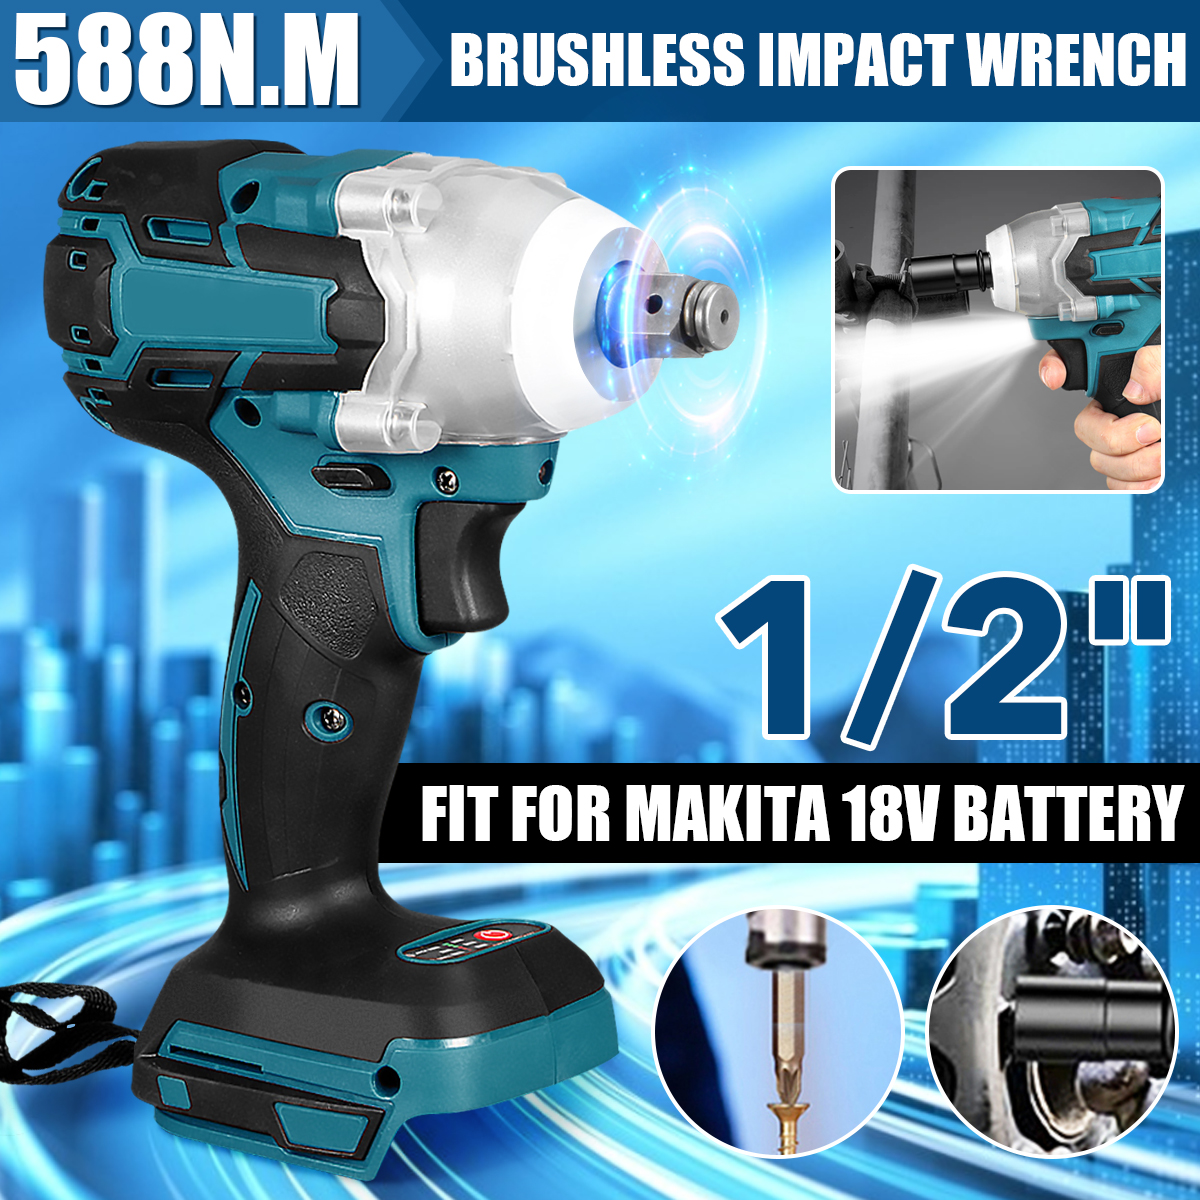 588Nm-Cordless-Brushless-Wrench12-Impact-Wrench-Driver-Replacement-for-Makita-18V-Battery-1856002-2